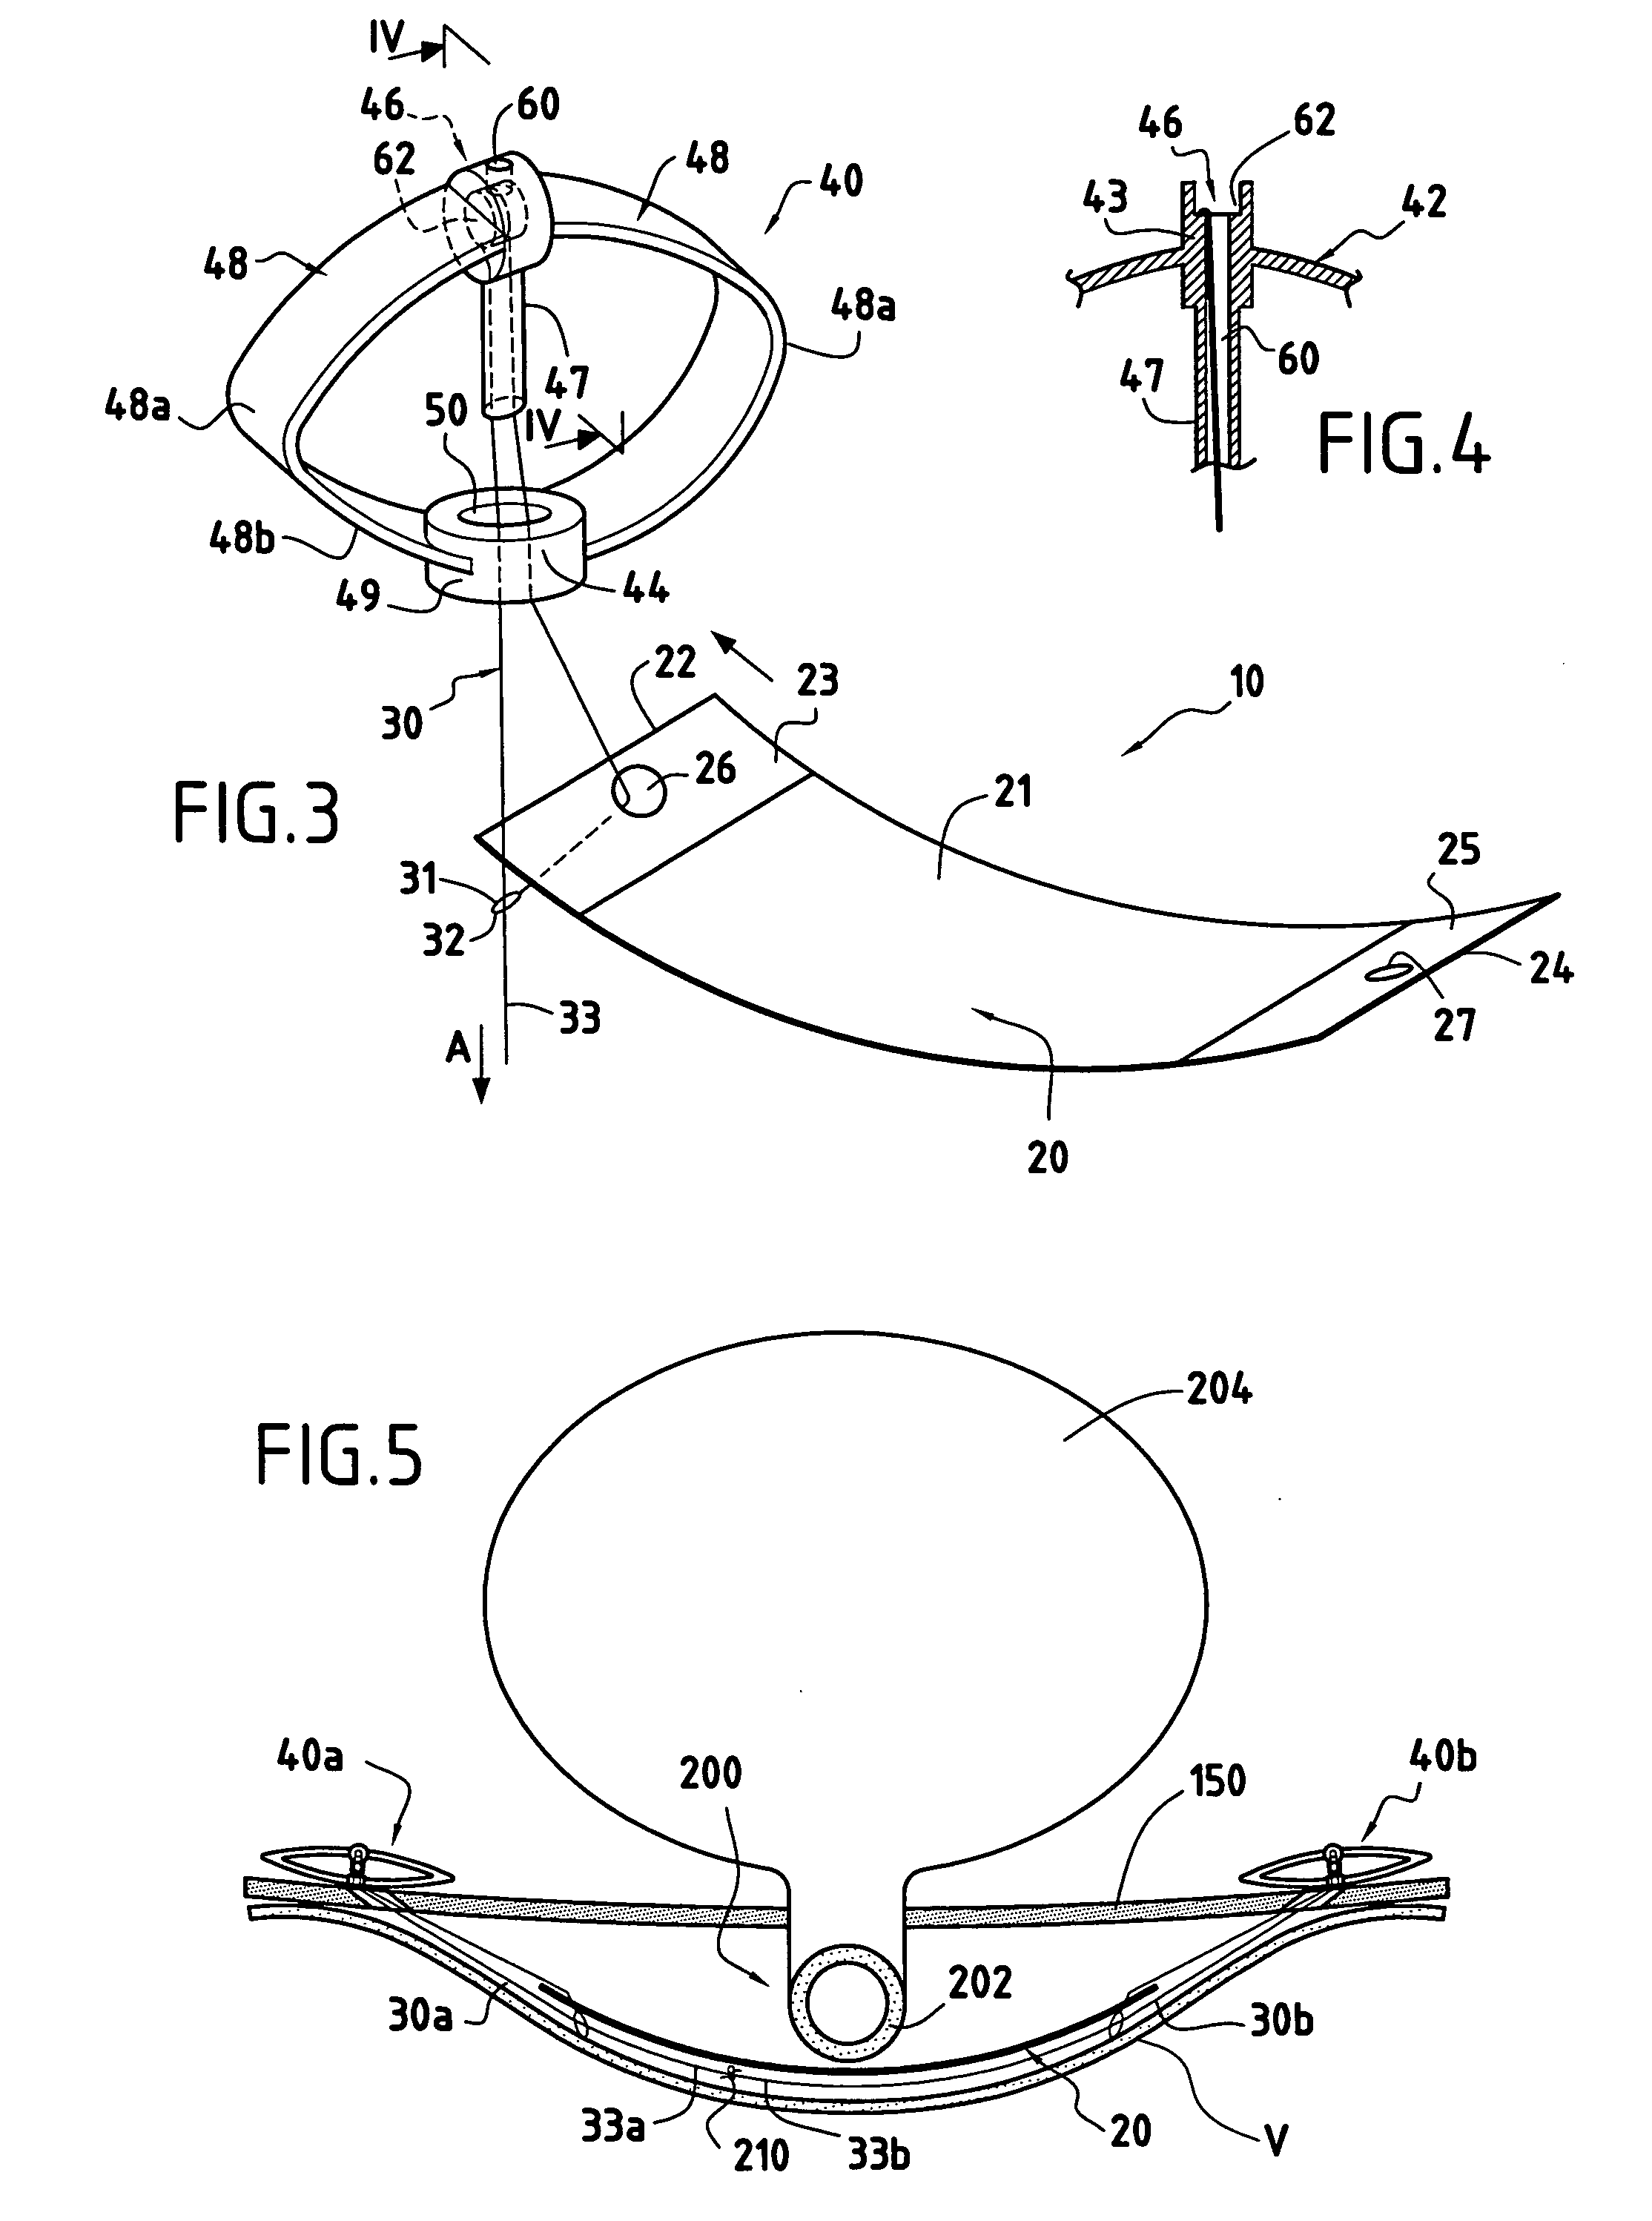 Surgical prosthesis-forming device used to implant an organ support in a mammal